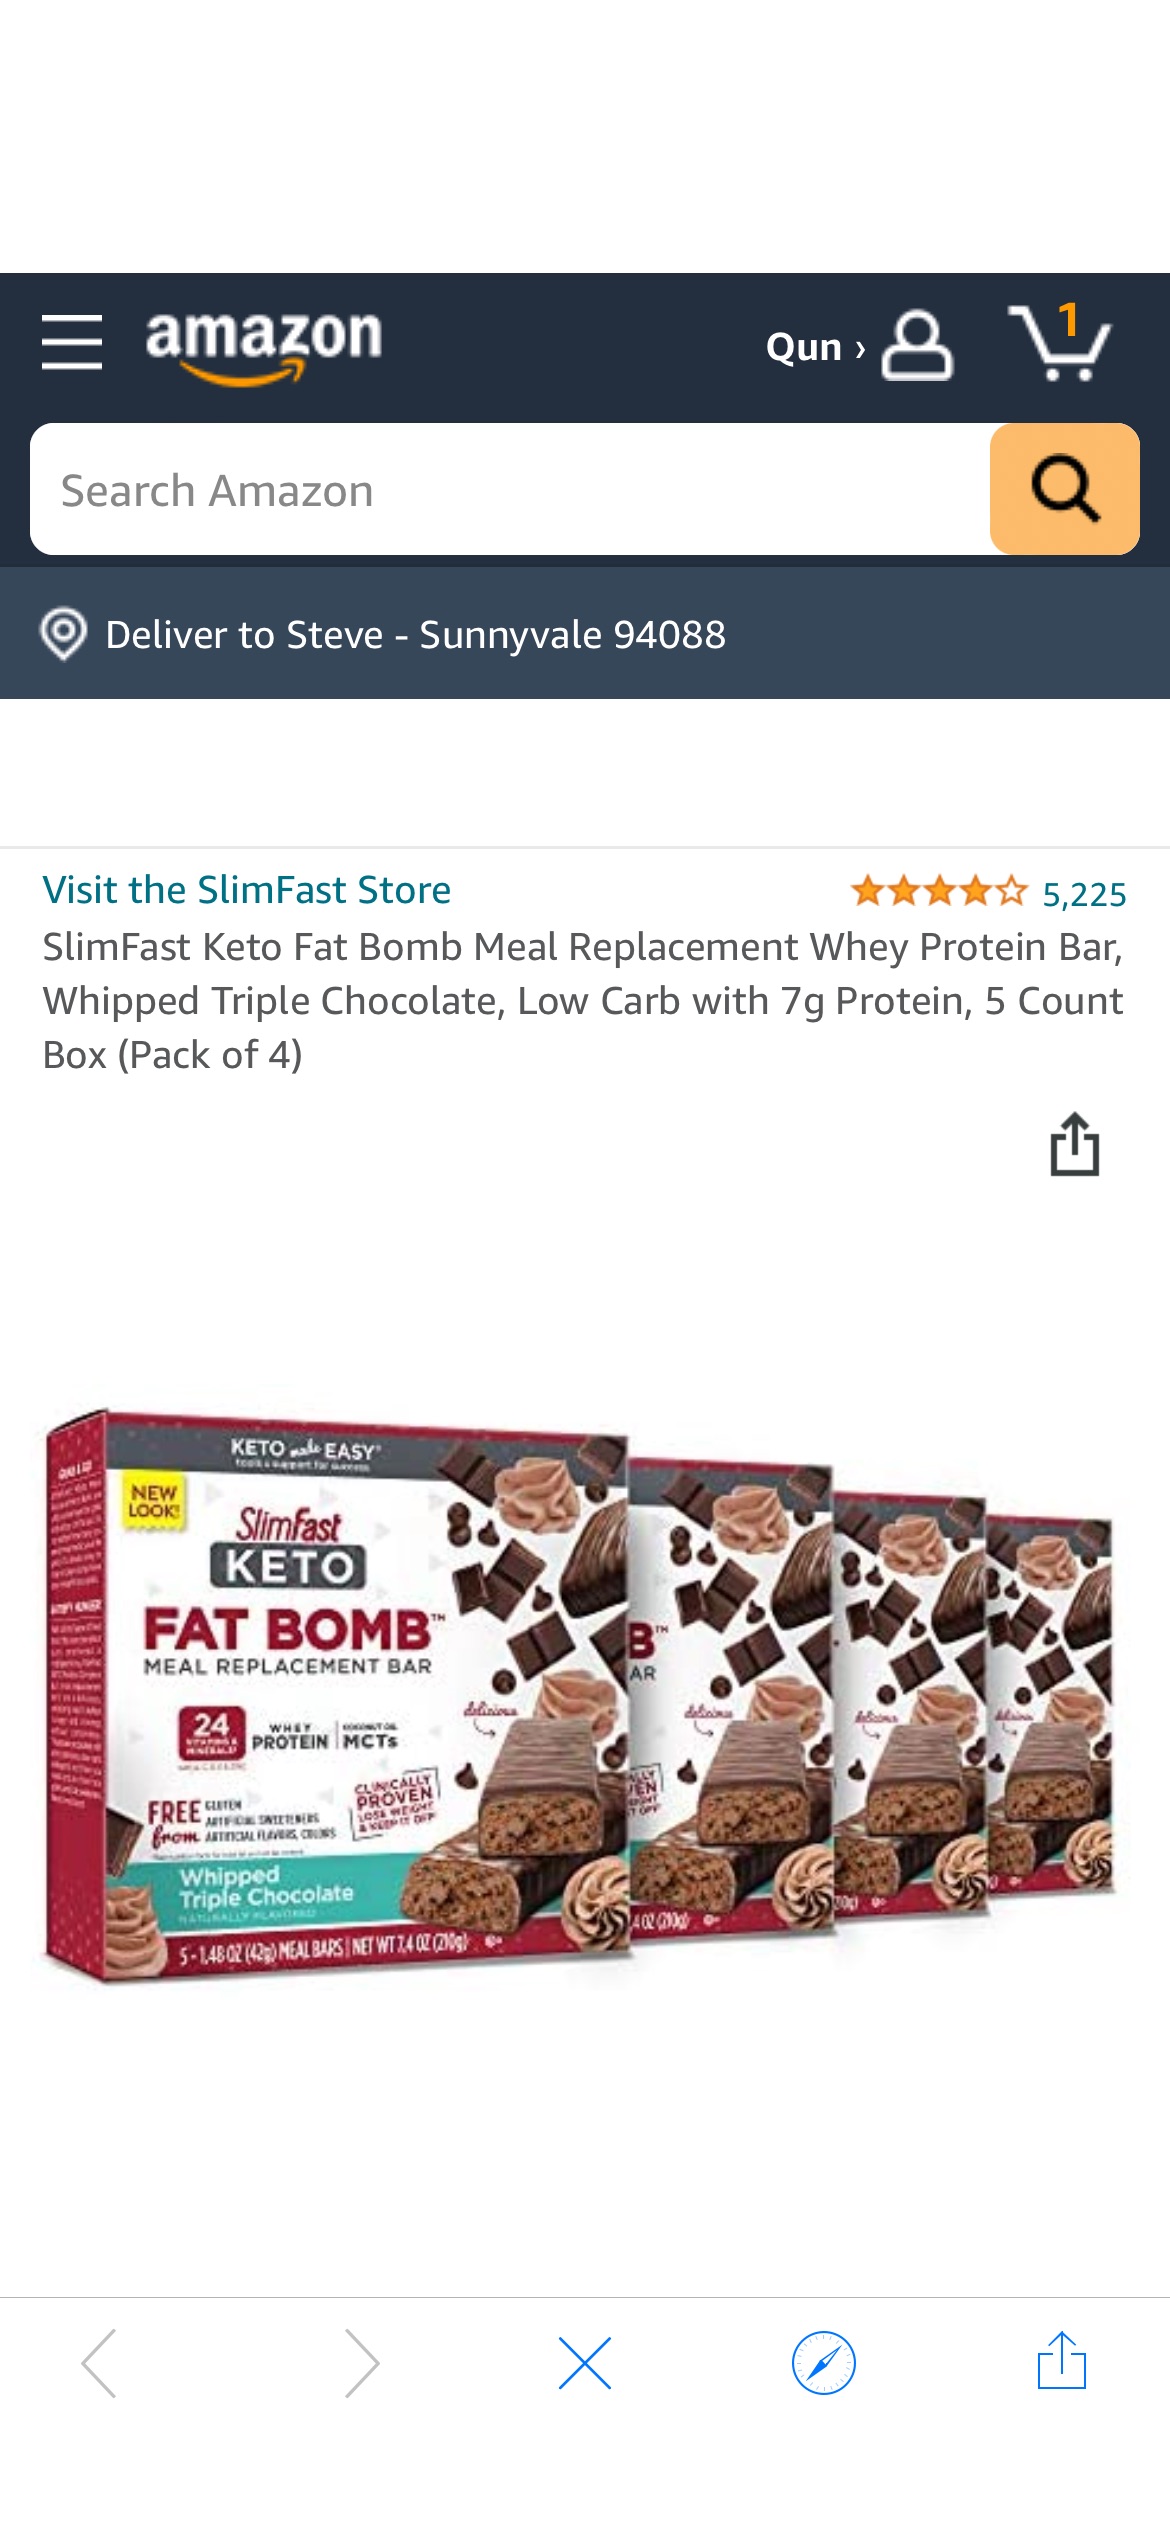 Amazon.com: SlimFast Keto Fat Bomb Meal Replacement Whey Protein Bar, Whipped Triple Chocolate, 为Low Carb with 7g Protein, 5 Count Box (Pack of 4) : Health & Household